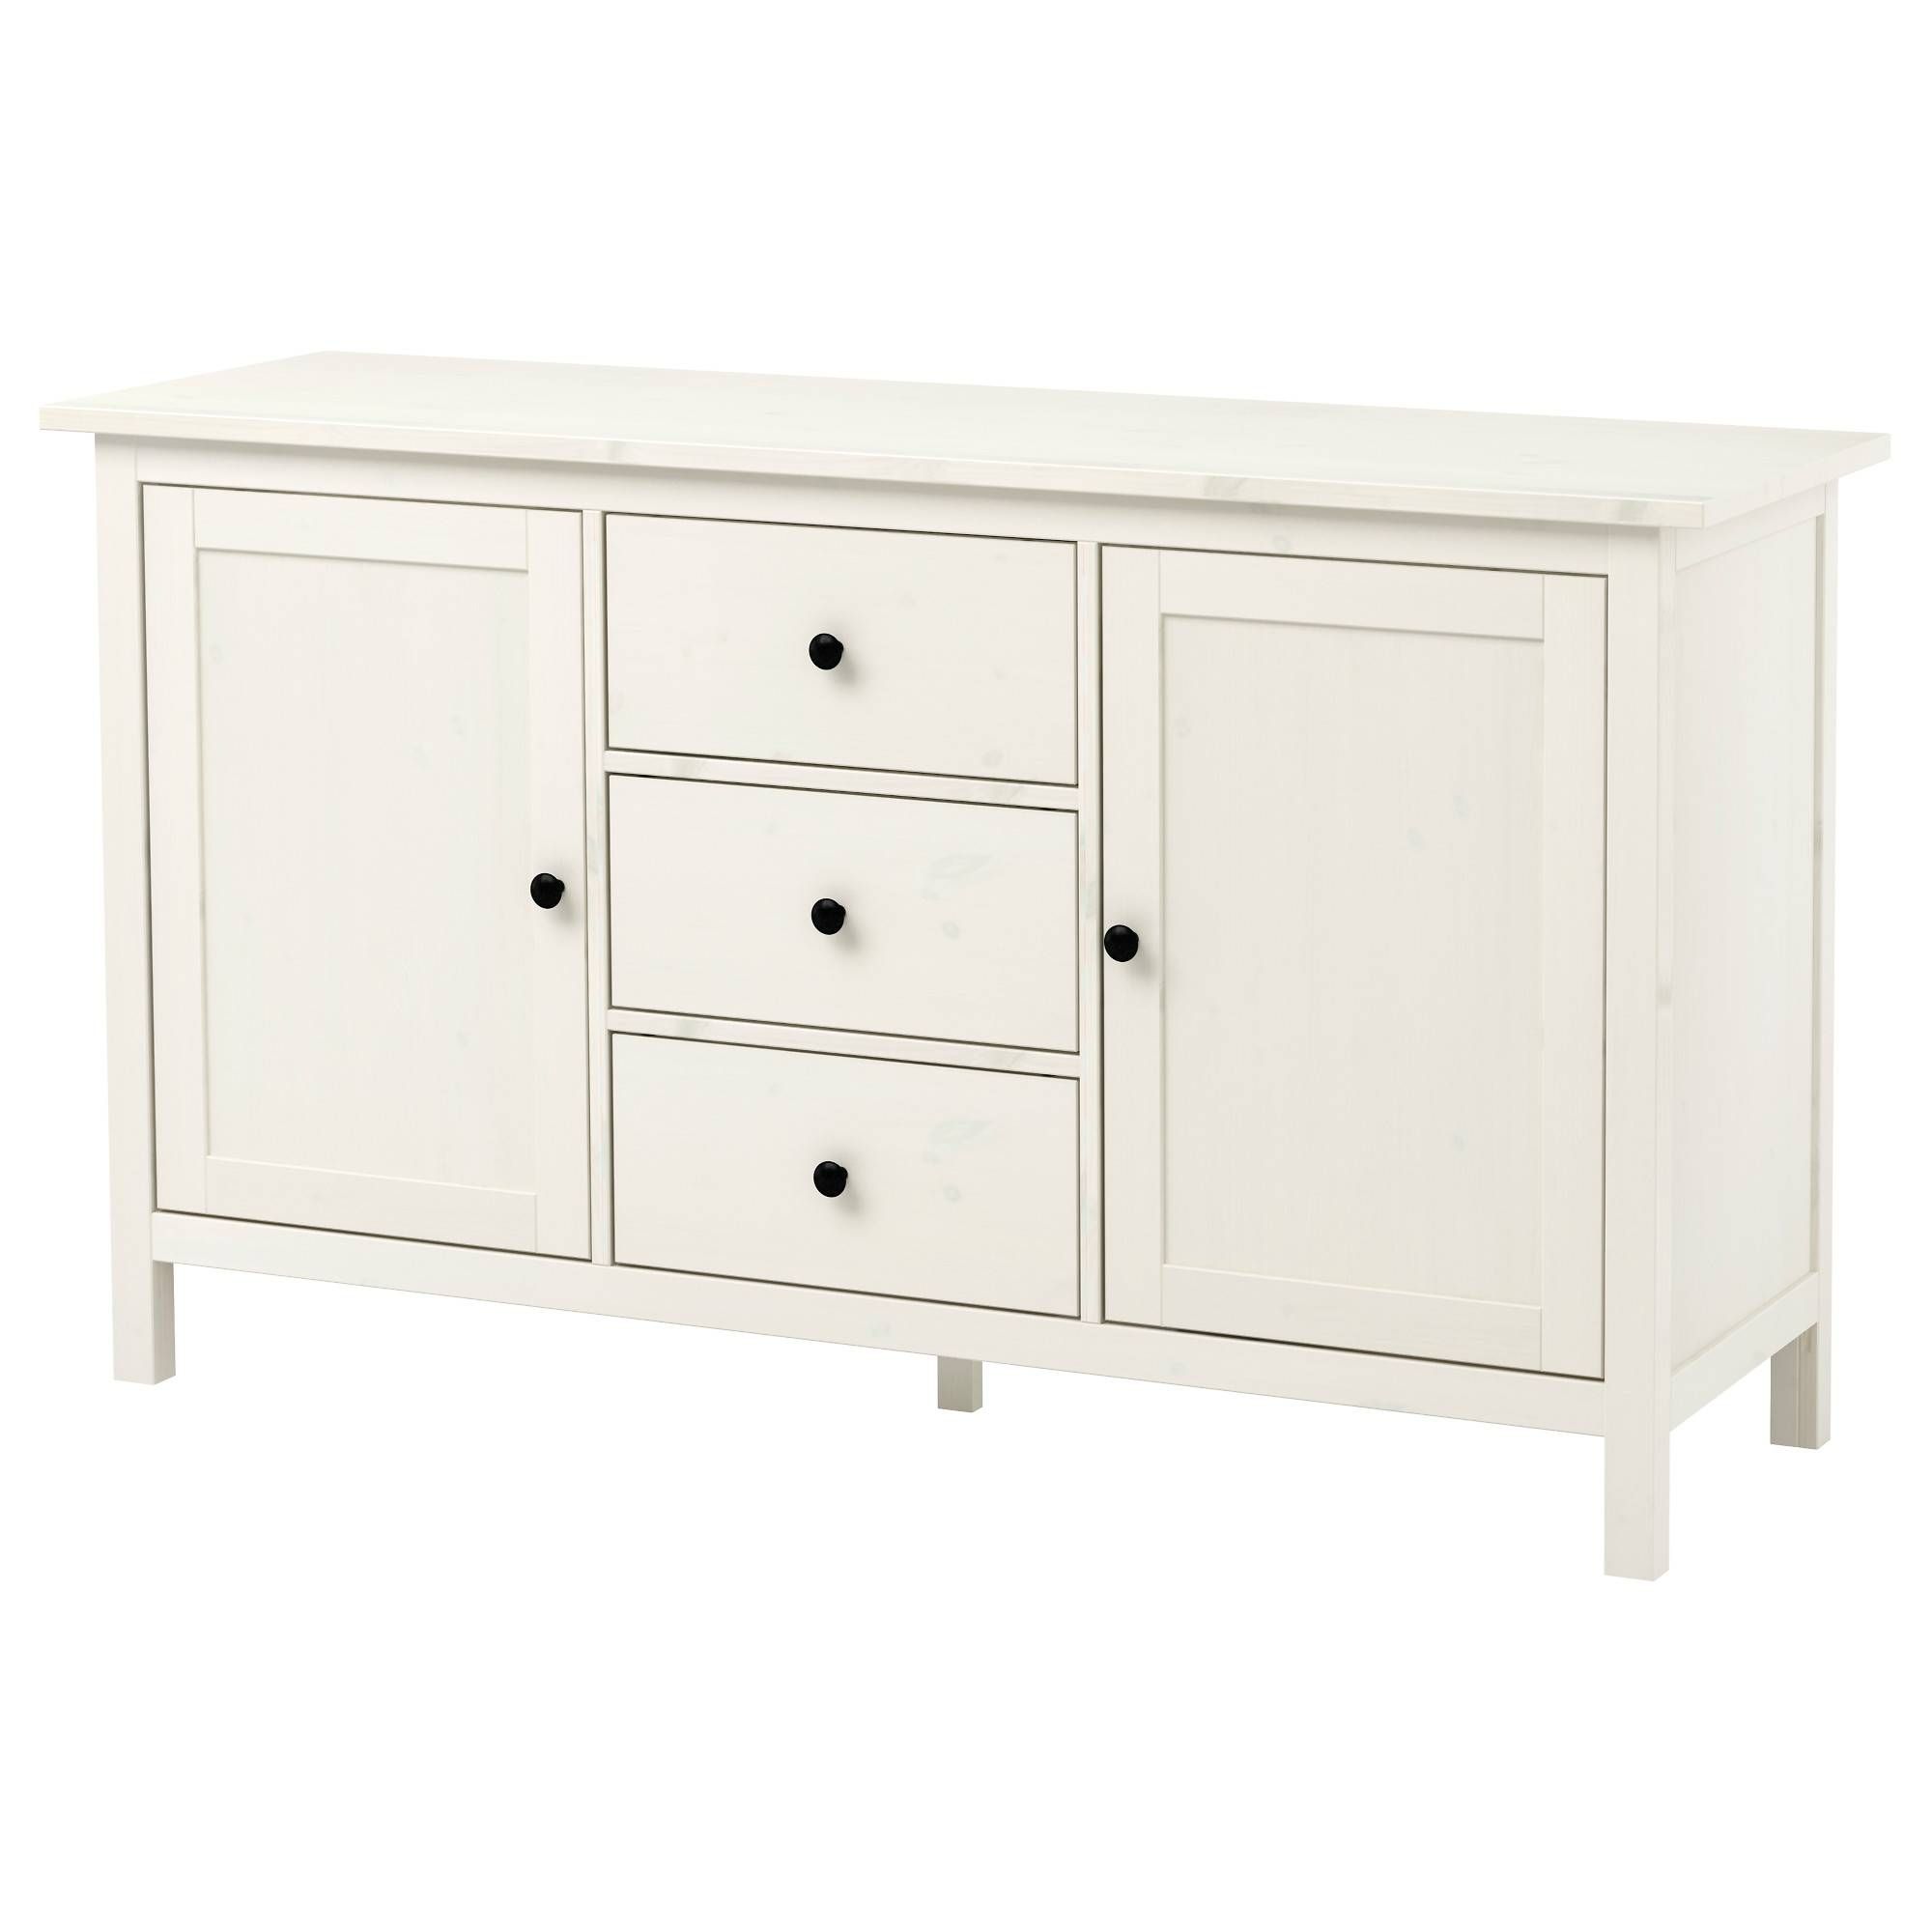 Hemnes Sideboard – White Stain – Ikea Throughout Tall Sideboard Cabinets (View 12 of 15)